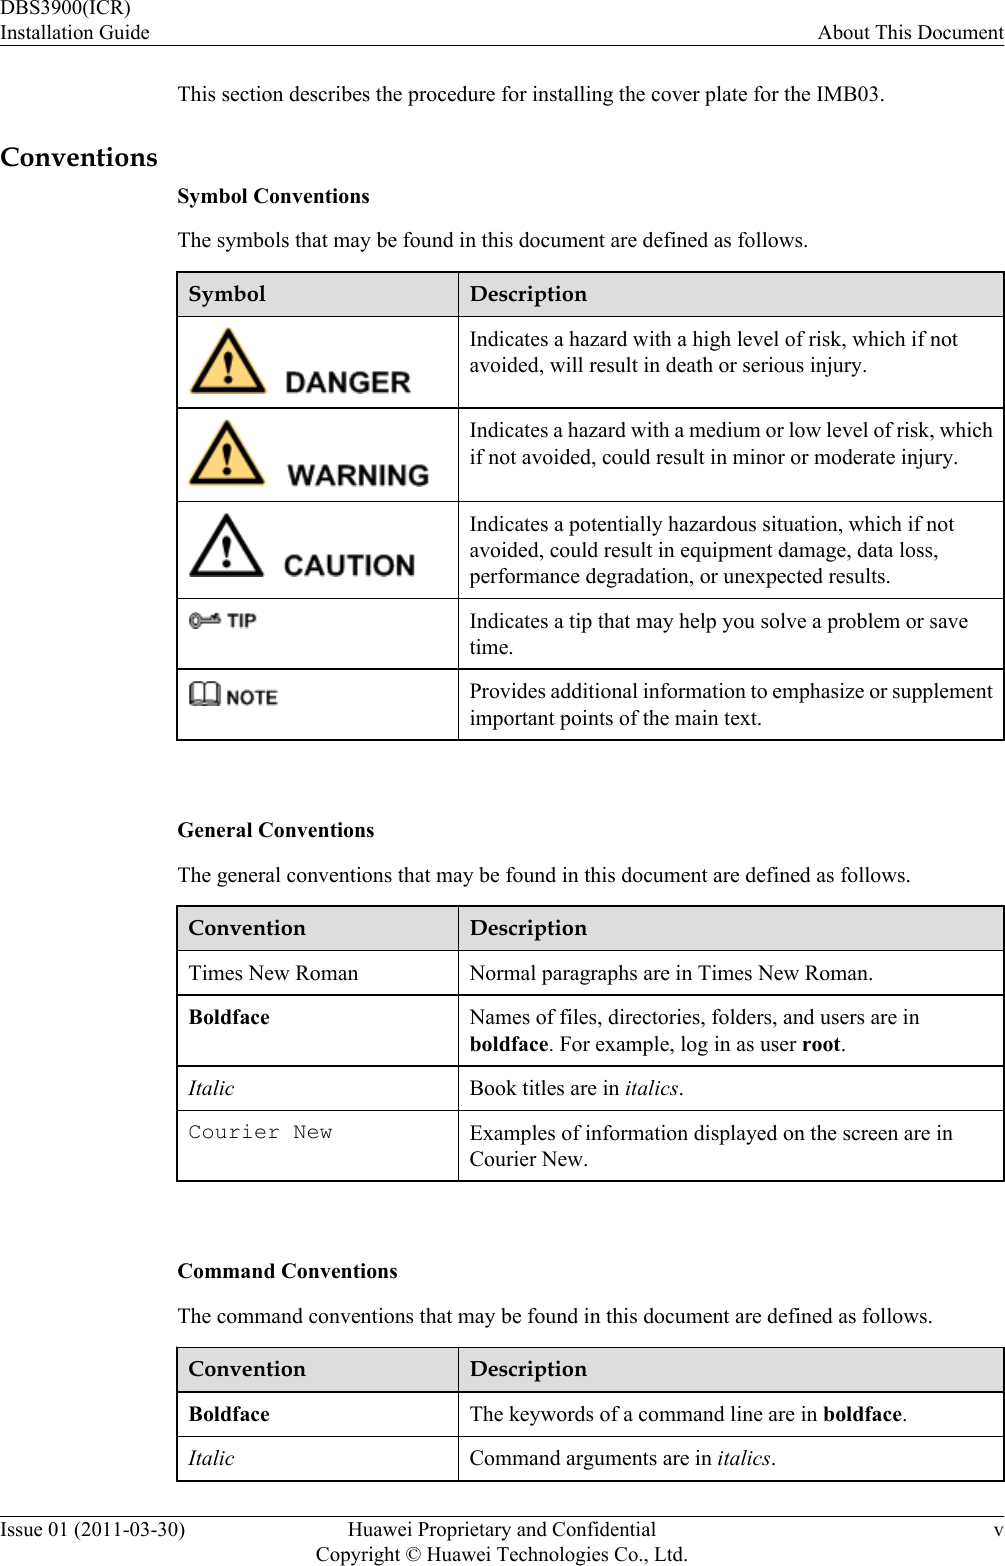 This section describes the procedure for installing the cover plate for the IMB03.ConventionsSymbol ConventionsThe symbols that may be found in this document are defined as follows.Symbol DescriptionIndicates a hazard with a high level of risk, which if notavoided, will result in death or serious injury.Indicates a hazard with a medium or low level of risk, whichif not avoided, could result in minor or moderate injury.Indicates a potentially hazardous situation, which if notavoided, could result in equipment damage, data loss,performance degradation, or unexpected results.Indicates a tip that may help you solve a problem or savetime.Provides additional information to emphasize or supplementimportant points of the main text. General ConventionsThe general conventions that may be found in this document are defined as follows.Convention DescriptionTimes New Roman Normal paragraphs are in Times New Roman.Boldface Names of files, directories, folders, and users are inboldface. For example, log in as user root.Italic Book titles are in italics.Courier New Examples of information displayed on the screen are inCourier New. Command ConventionsThe command conventions that may be found in this document are defined as follows.Convention DescriptionBoldface The keywords of a command line are in boldface.Italic Command arguments are in italics.DBS3900(ICR)Installation Guide About This DocumentIssue 01 (2011-03-30) Huawei Proprietary and ConfidentialCopyright © Huawei Technologies Co., Ltd.v